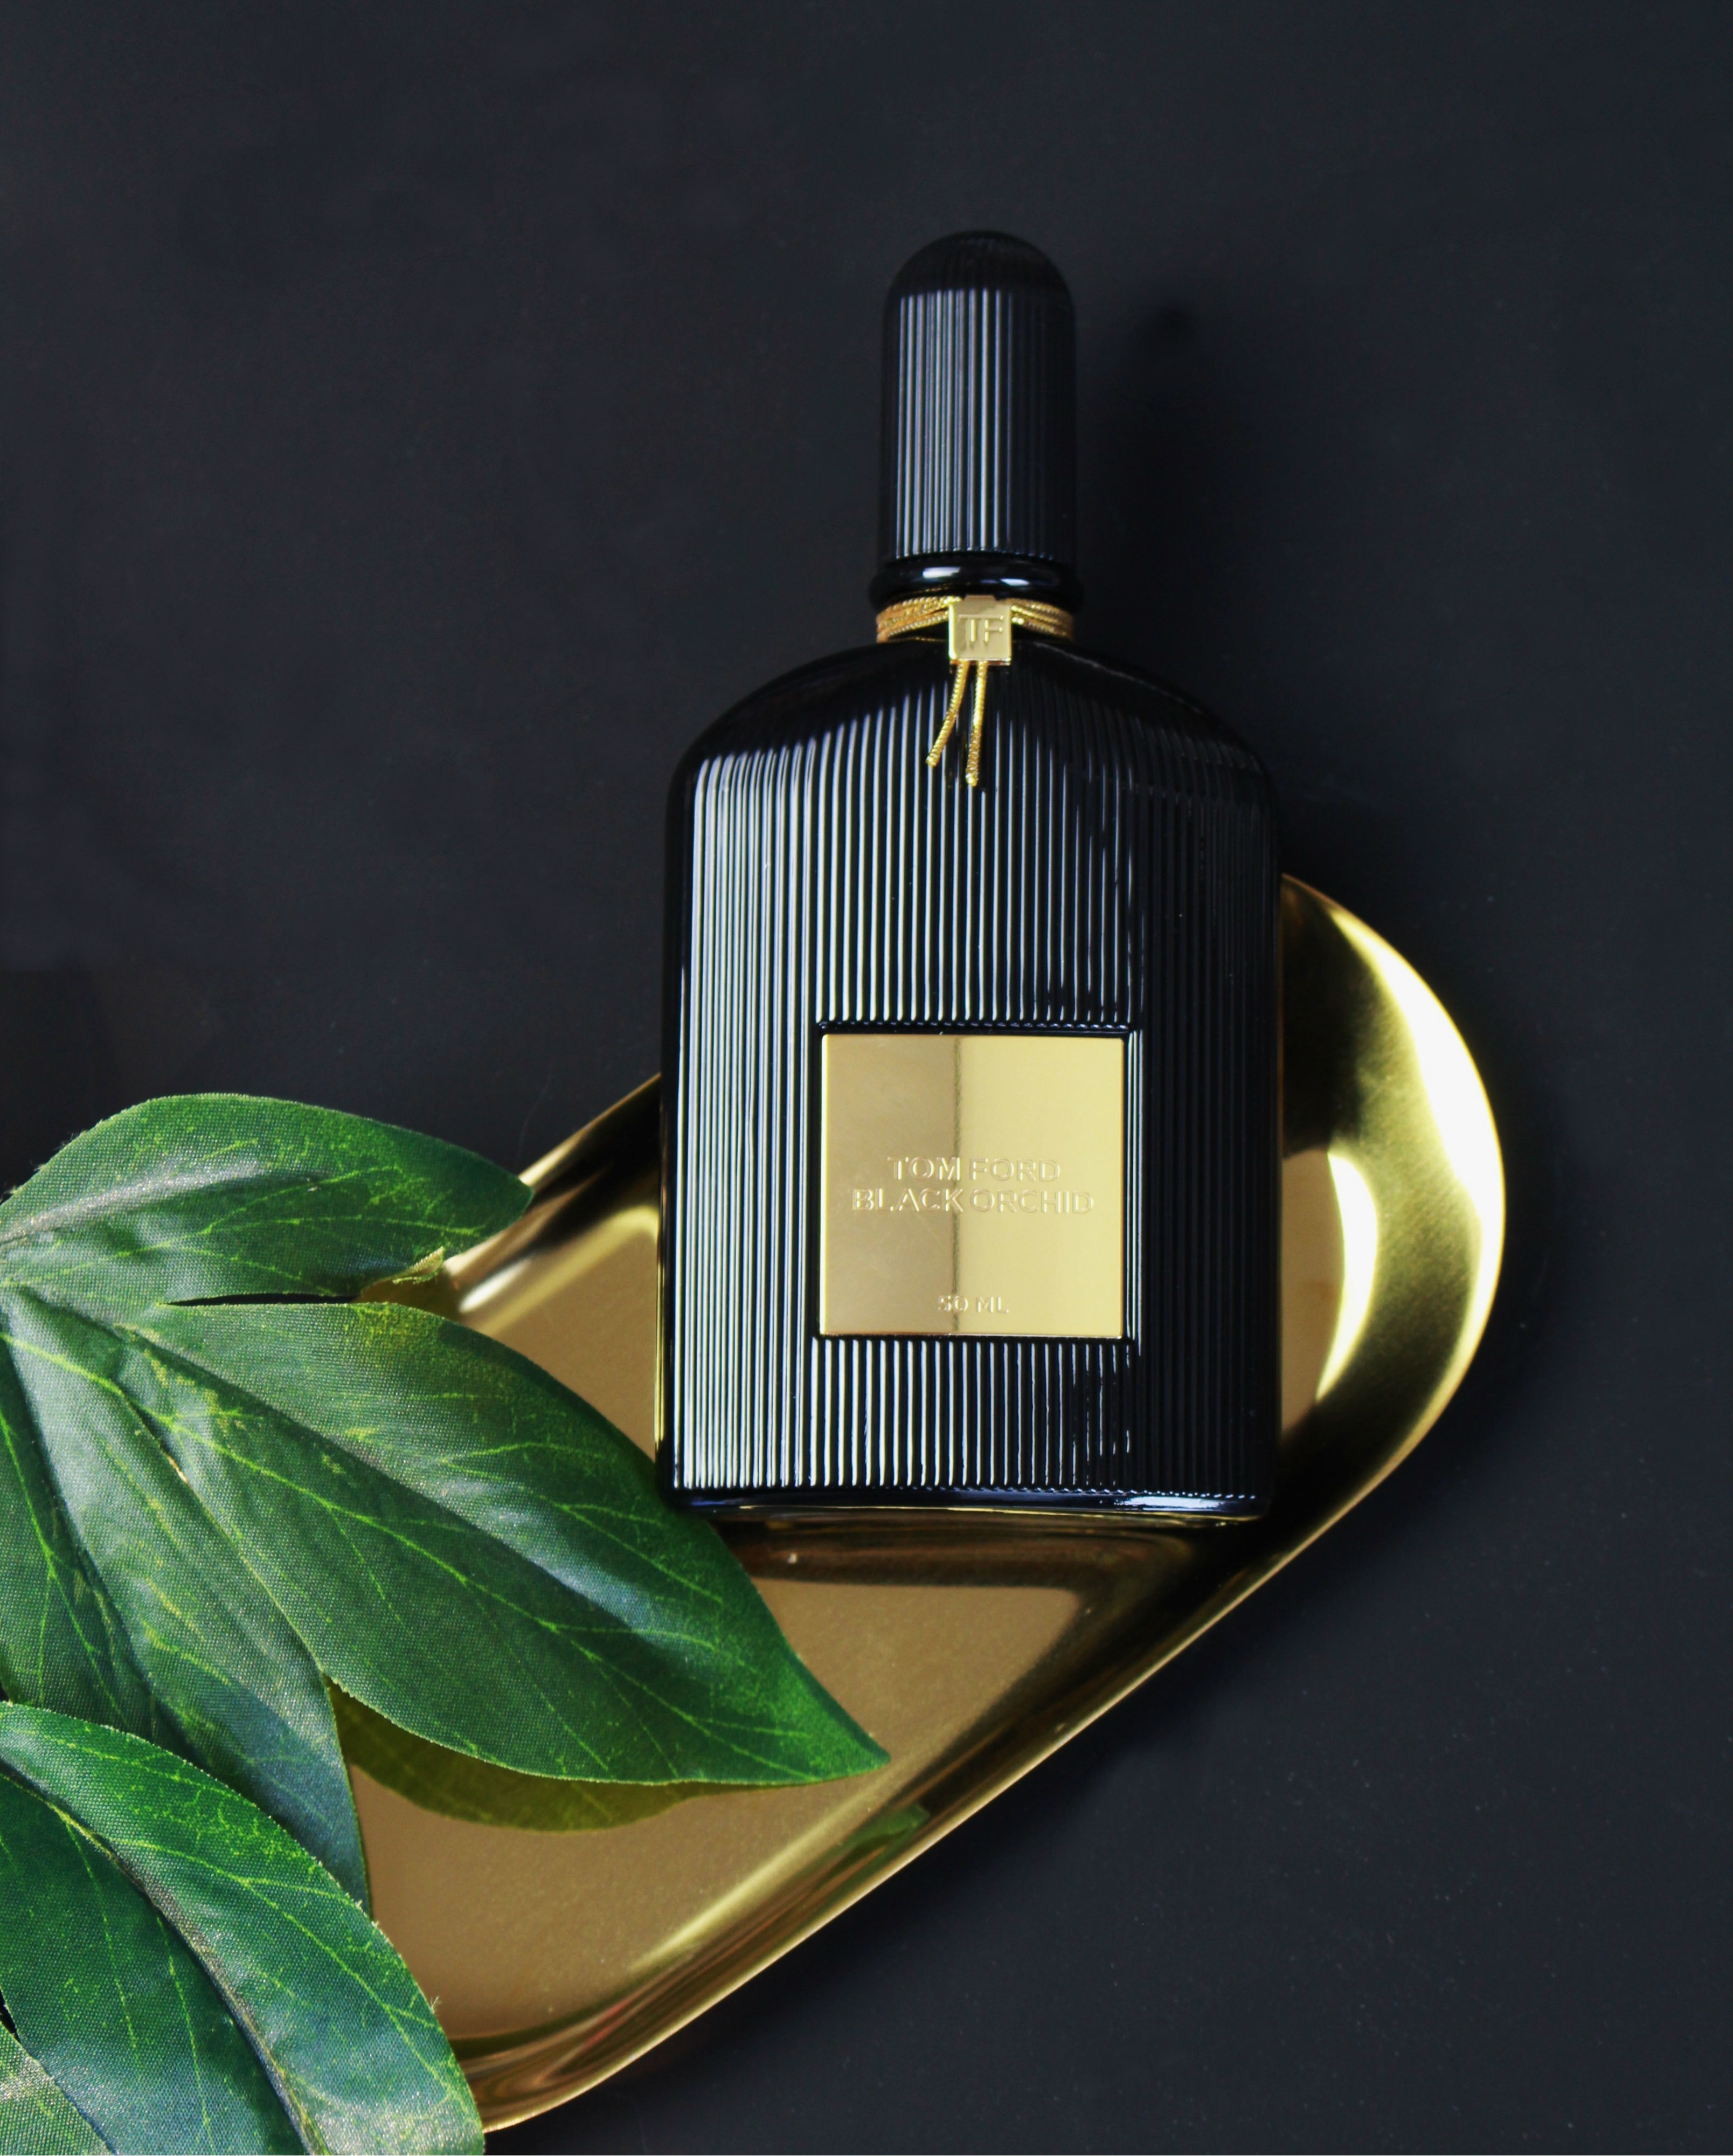 tomford_black_orchid